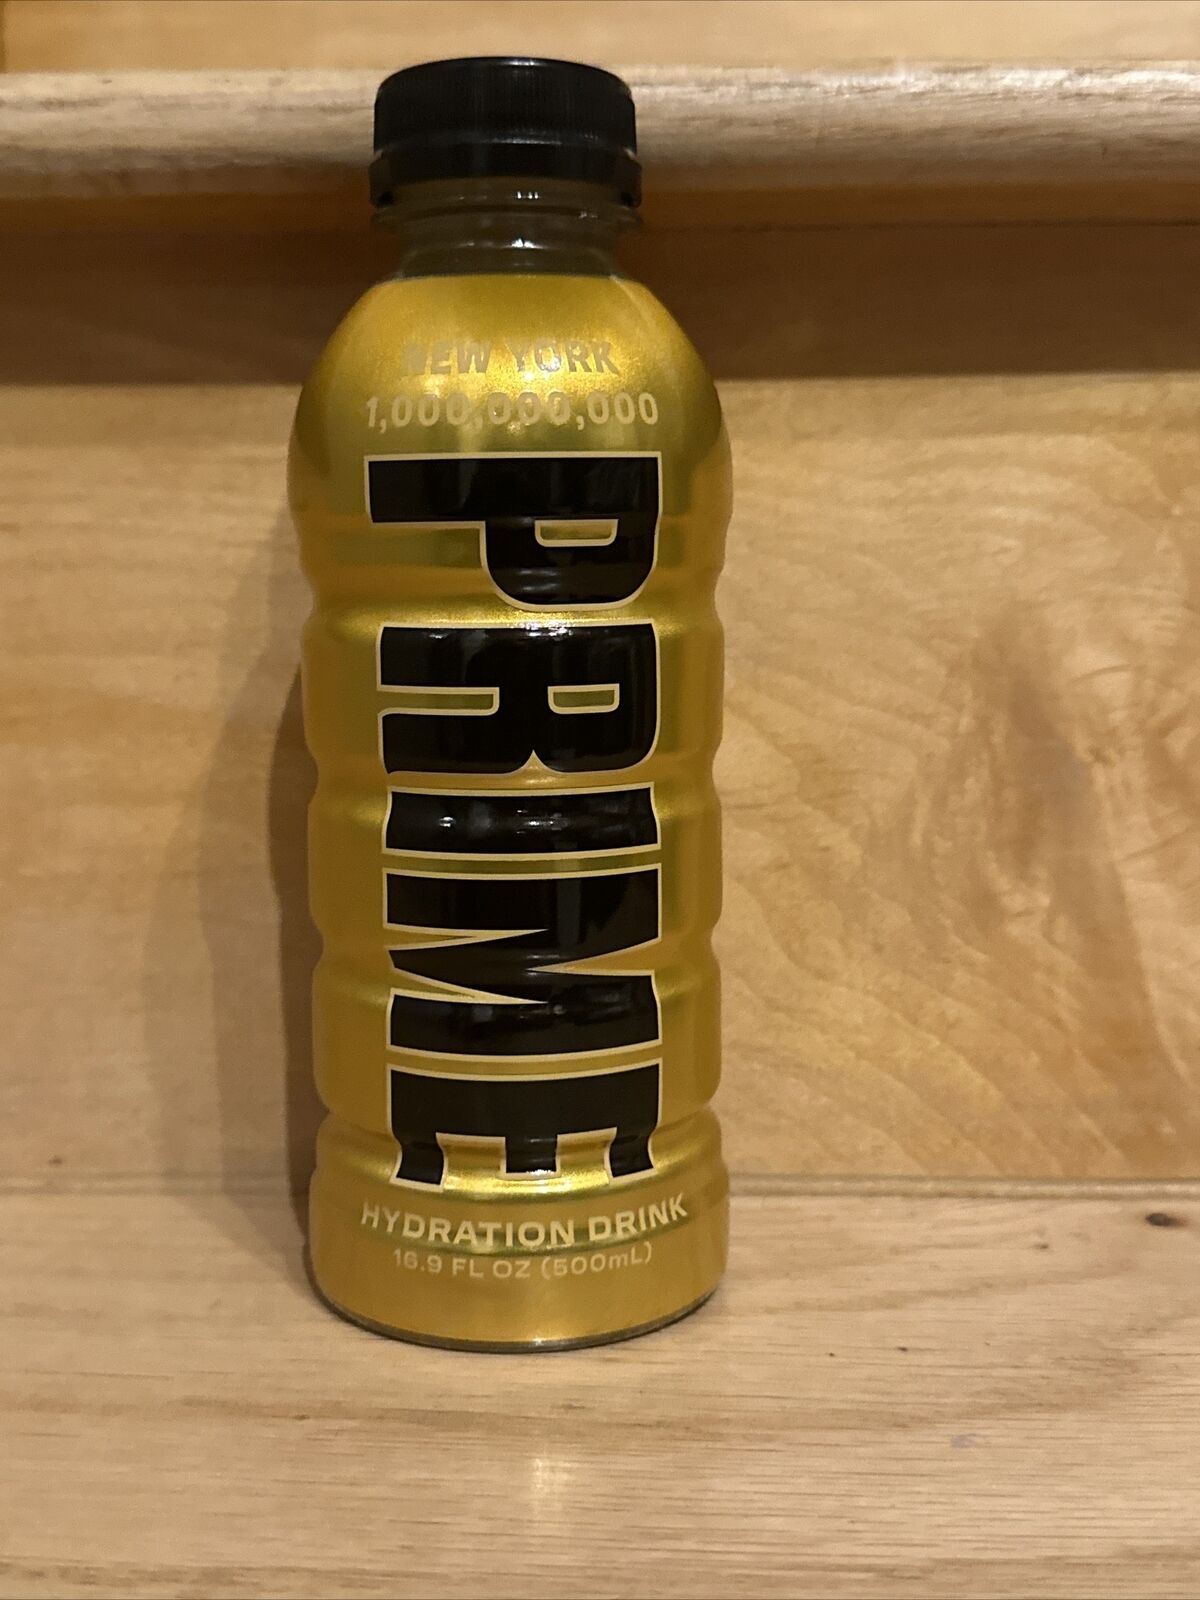 NEW LIMITED NYC EDITION PRIME HYDRATION DRINK 1 BILLION GOLD 16.9